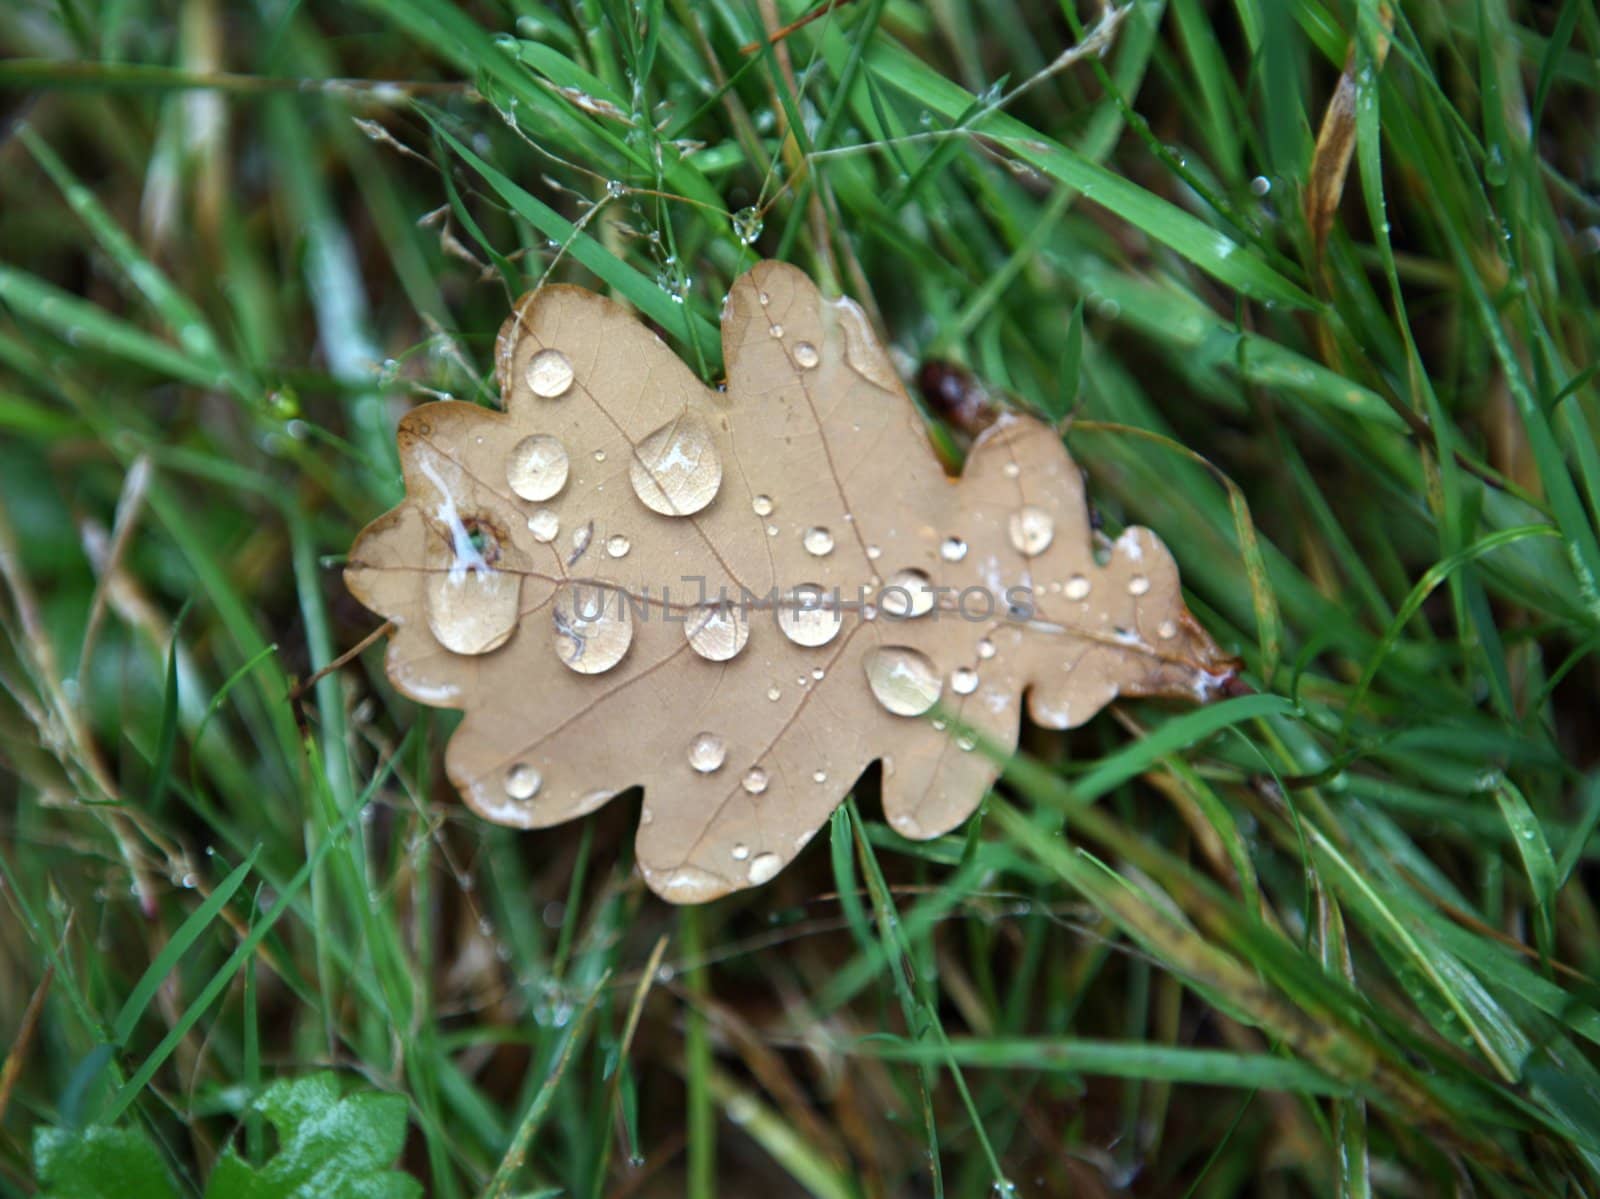 Moisture on dropped leaf lying in grass